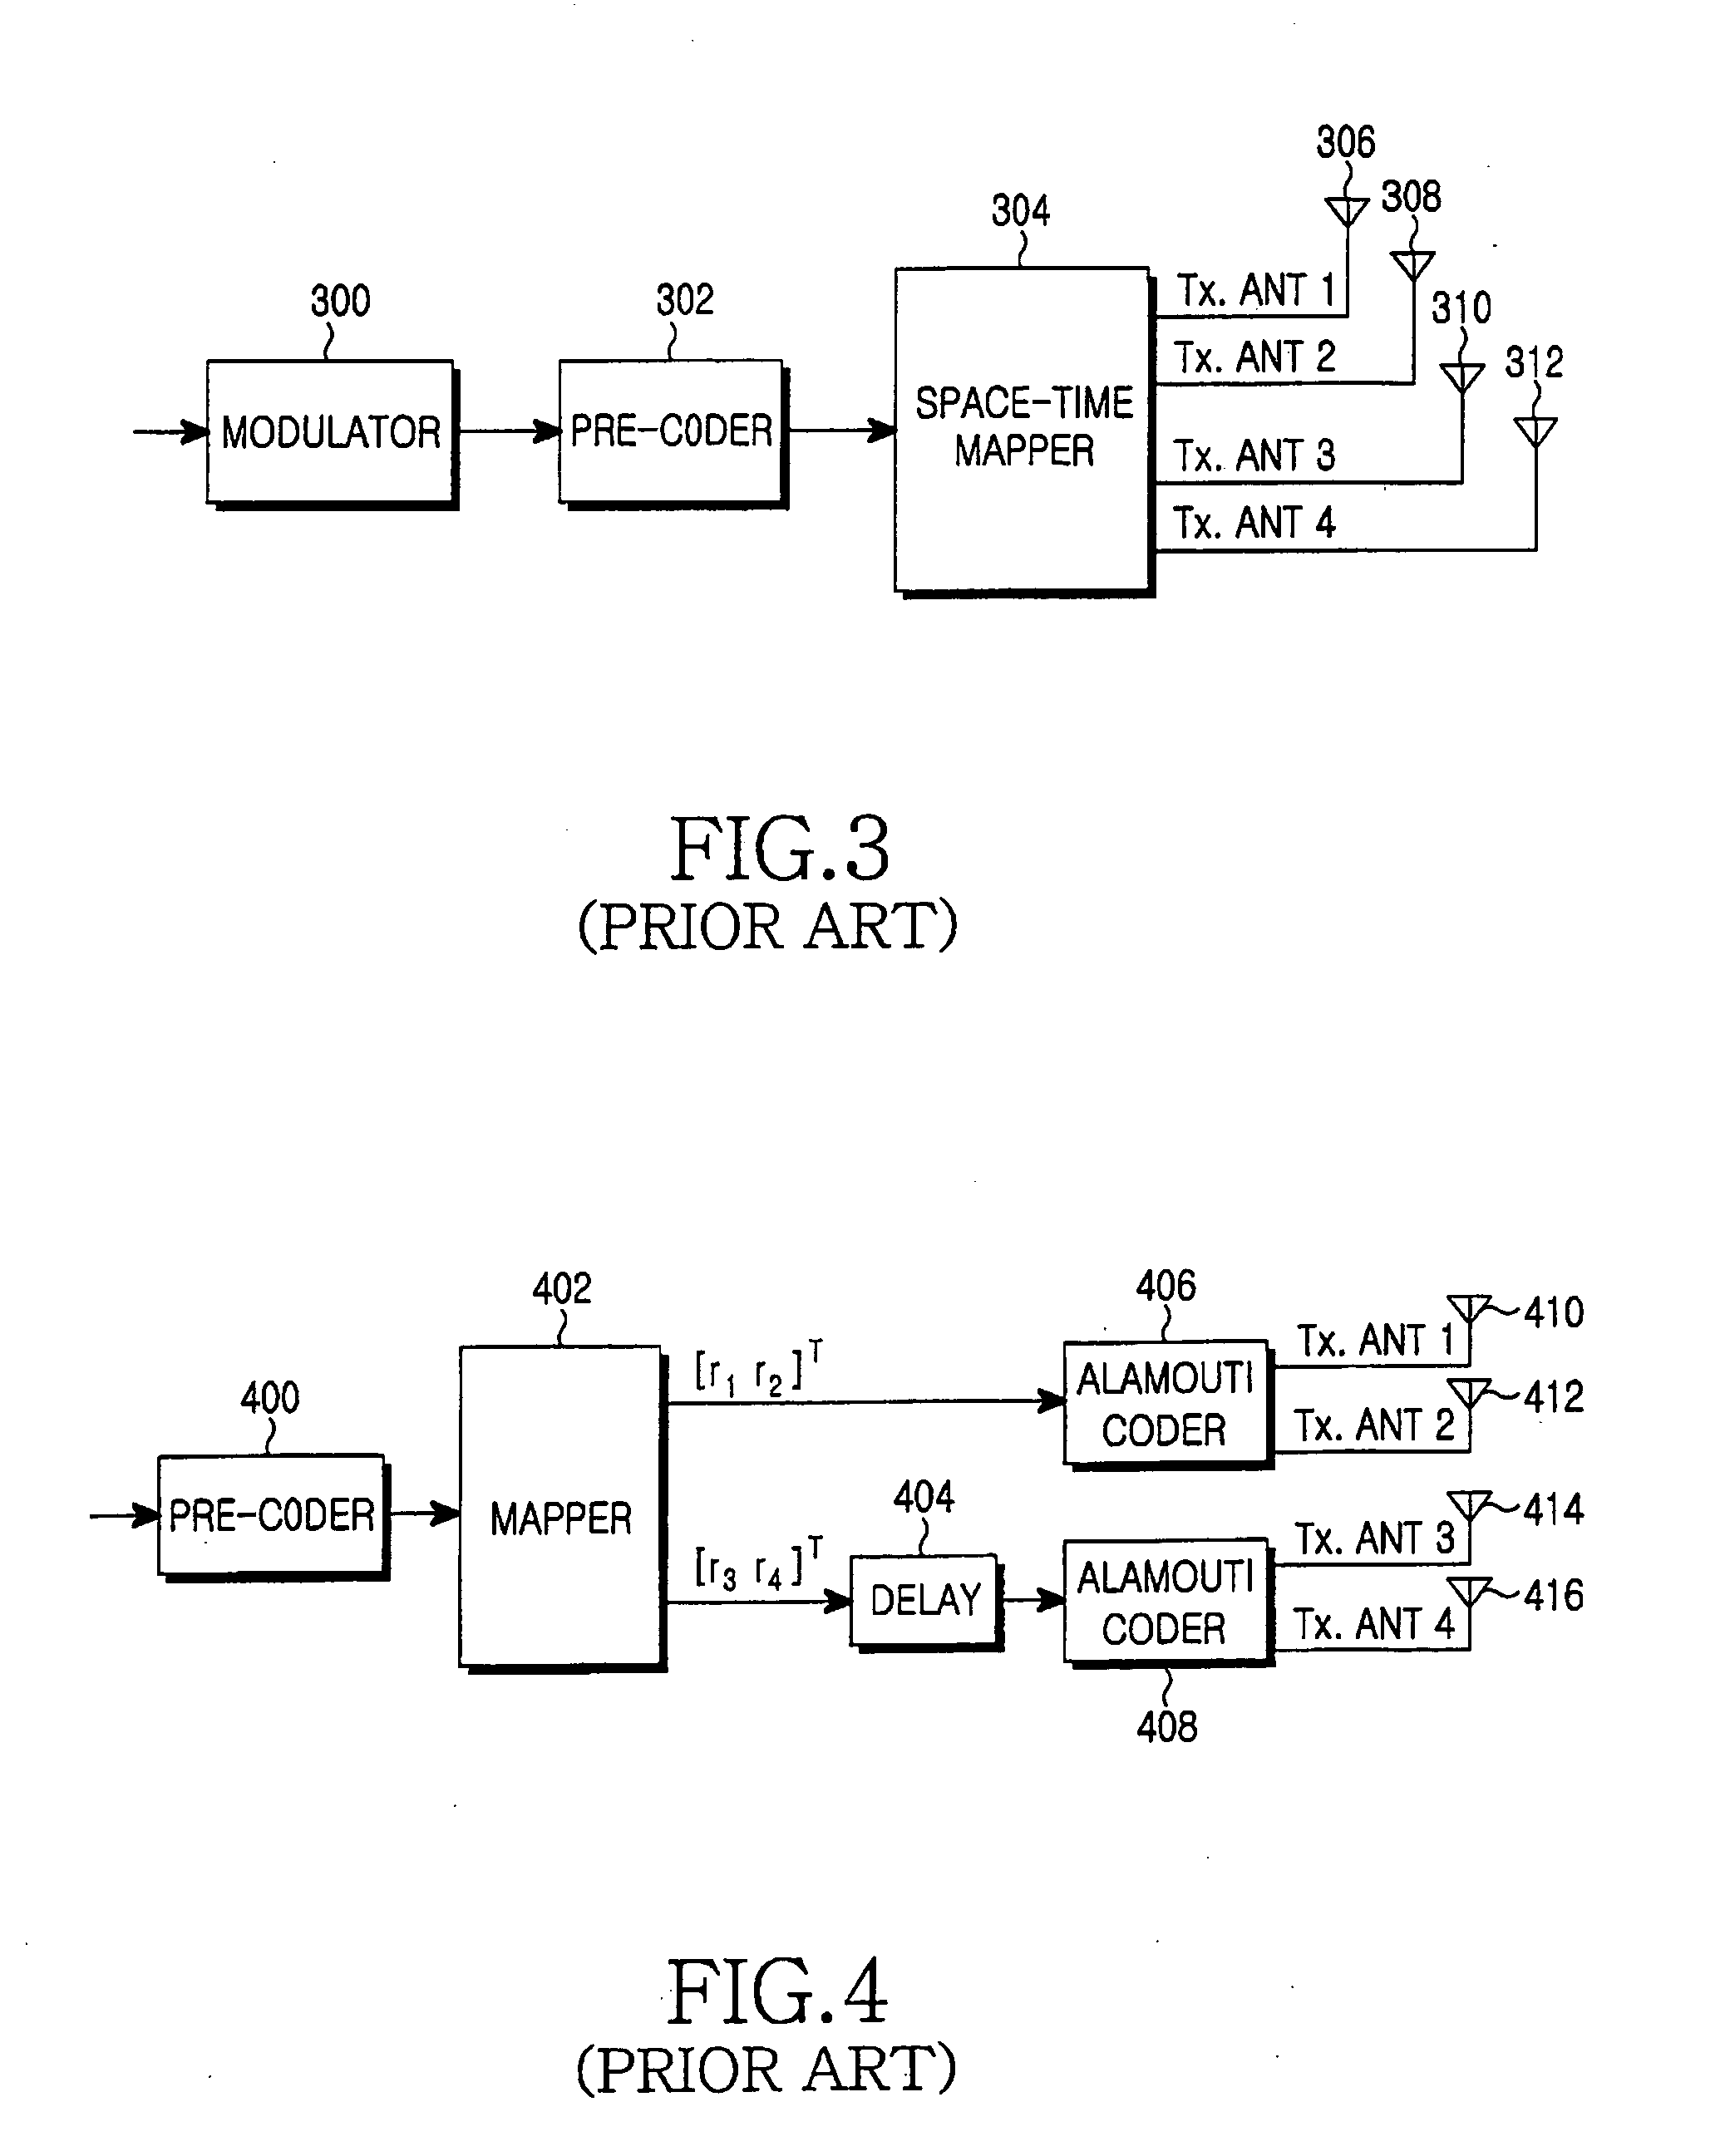 Apparatus and method for space-time-frequency block coding for increasing performance